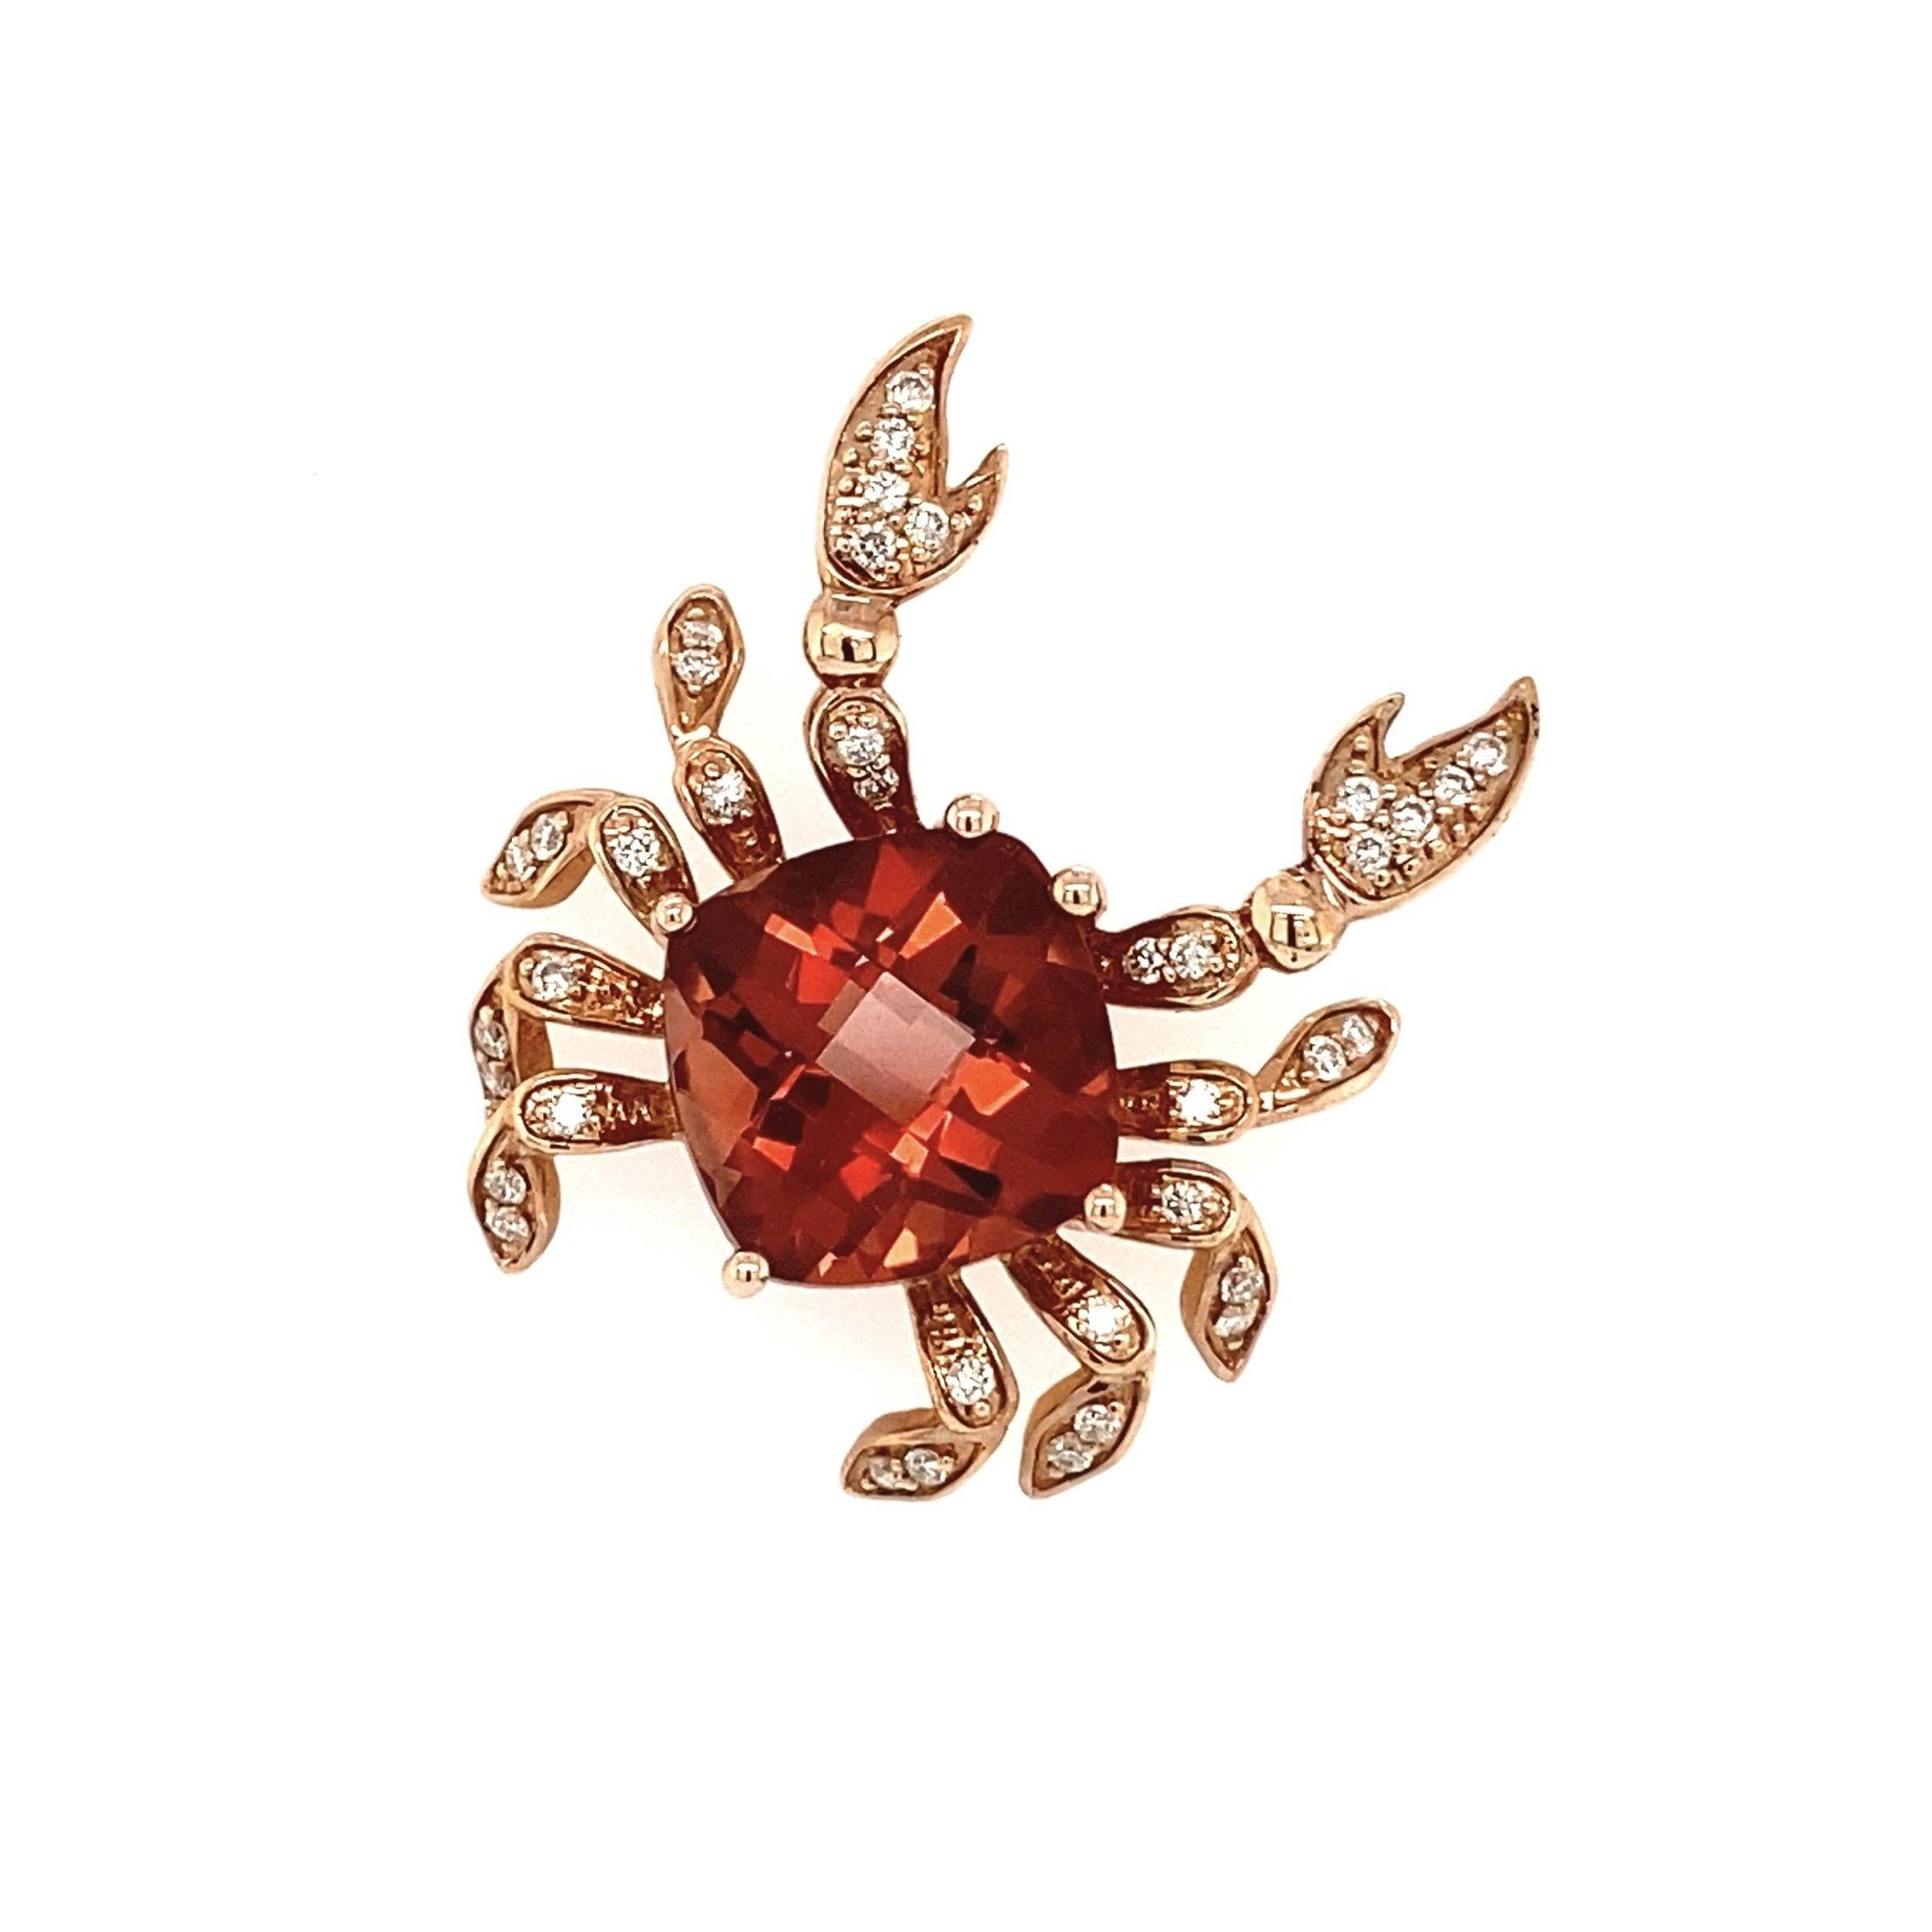 
Delightful Finely Detailed Sunstone Gem and Diamond Crab Pendant. Hand set with a 3.25 Carat Cushion Sandstone and accented by Diamonds, approx. 0.20tcw. Hand crafted in 14 Karat Rose Gold. Measuring approx. 1.10” l x 0.85” w. This pendant